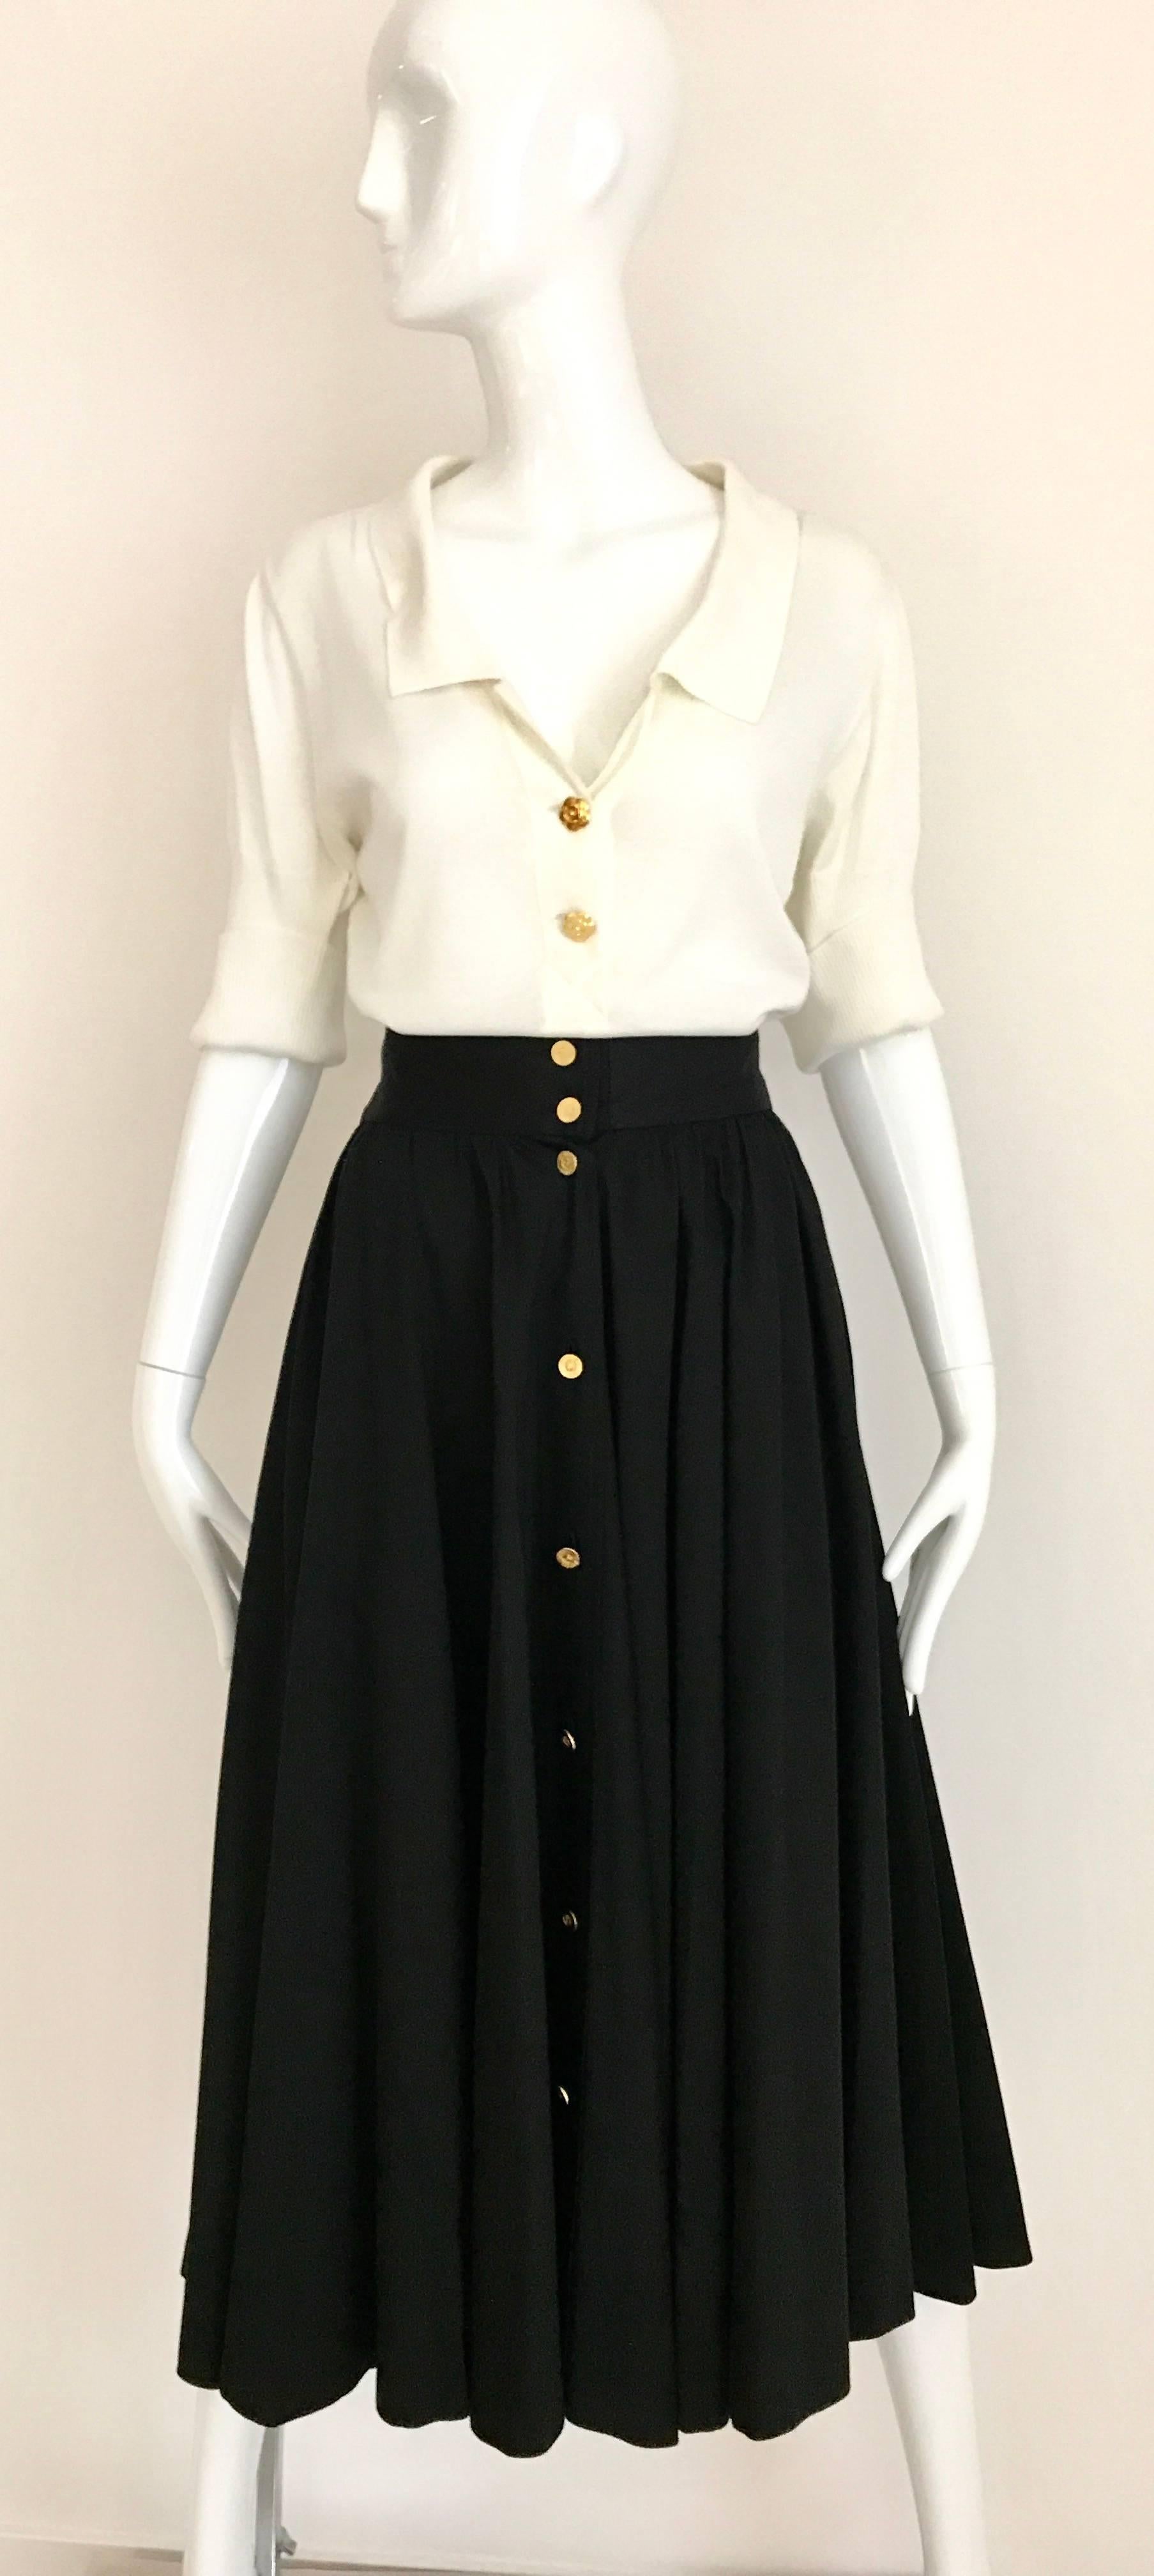 Vintage 70s CHANEL black cotton midi skirt with gold cc button with 2 pockets.
Skirt is worn with vintage Chanel creme Knit top available for purchase at Sielian's Vintage 1stdibs store.
Waist: 28 inch / skirt length 33 inch

**** This Garment has